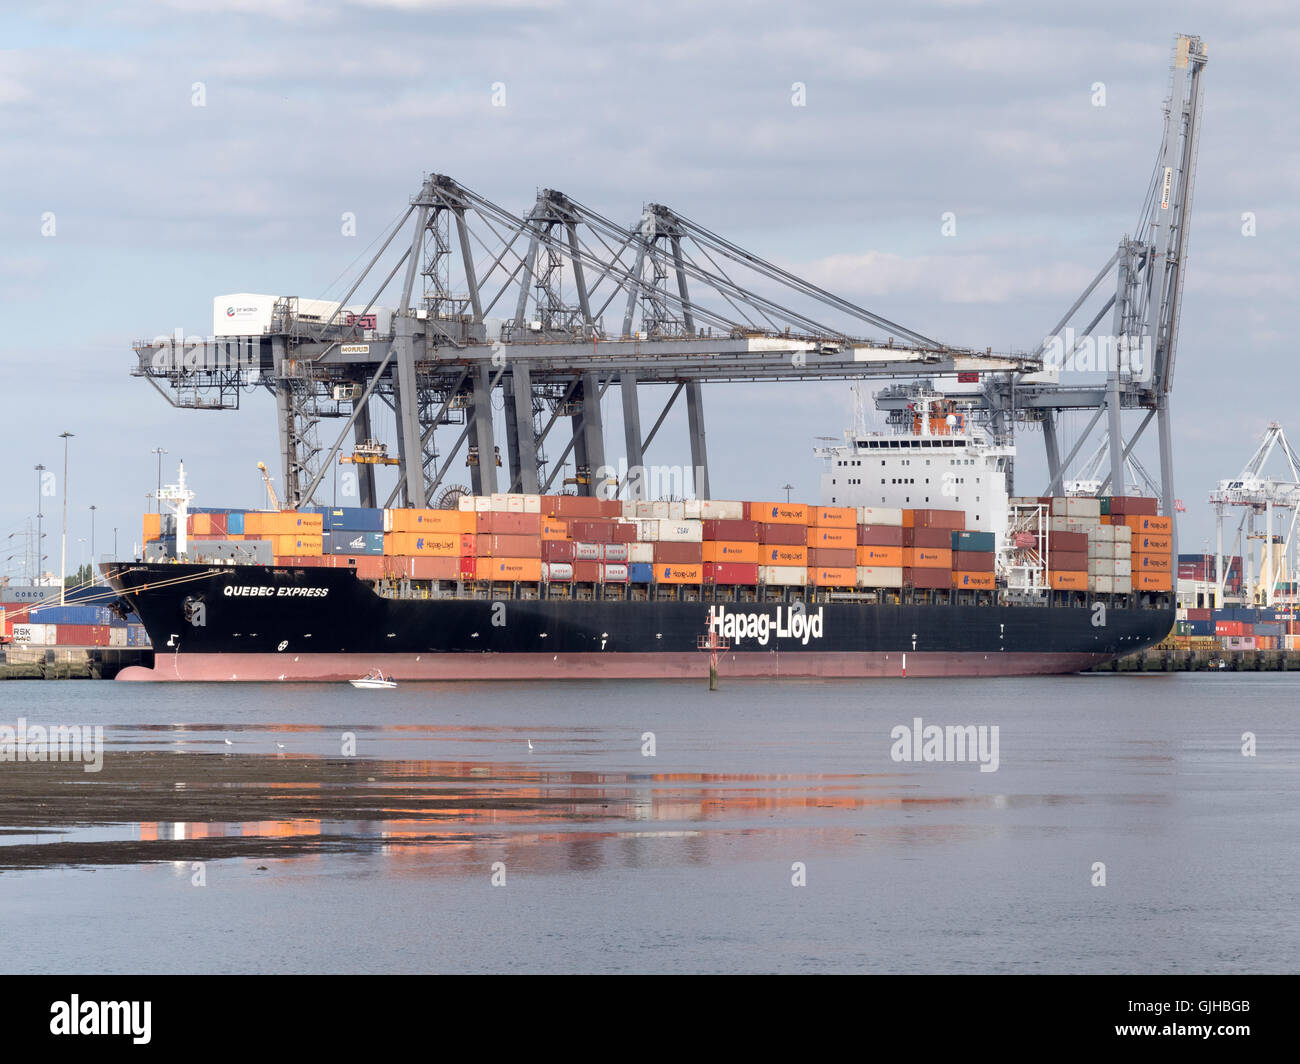 Hapag-Lloyd "Quebec Express" Container-Schiff angedockt an Southampton Container-Hafen, Southampton, Hampshire, England, UK. Stockfoto